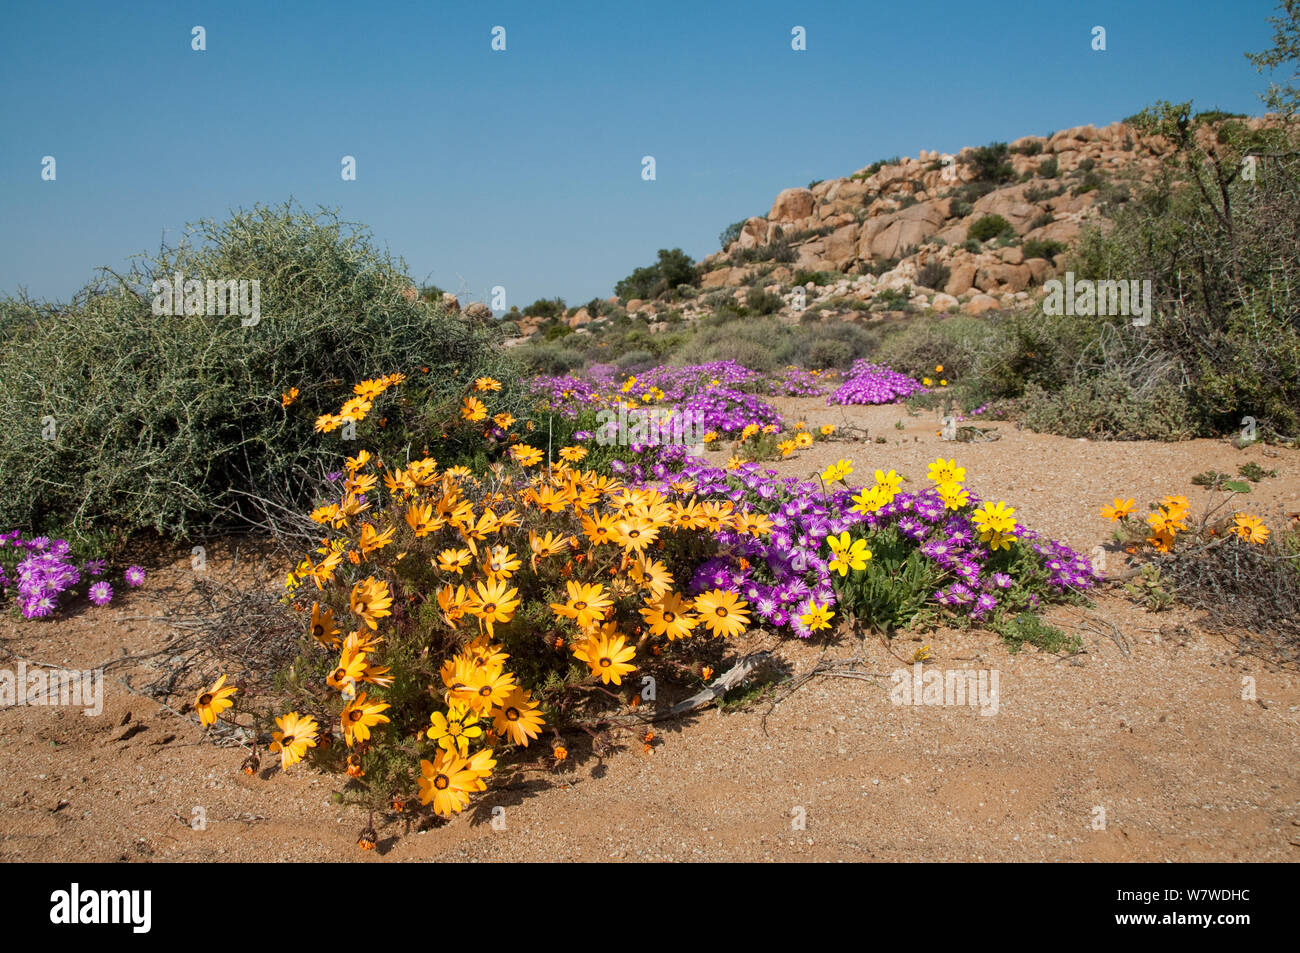 Daisies (Dimorphotheca sinuata) and Ice plants (Drosanthemum hispidum) in flower, Goegap Nature Reserve, Namaqualand, South Africa, August. Stock Photo